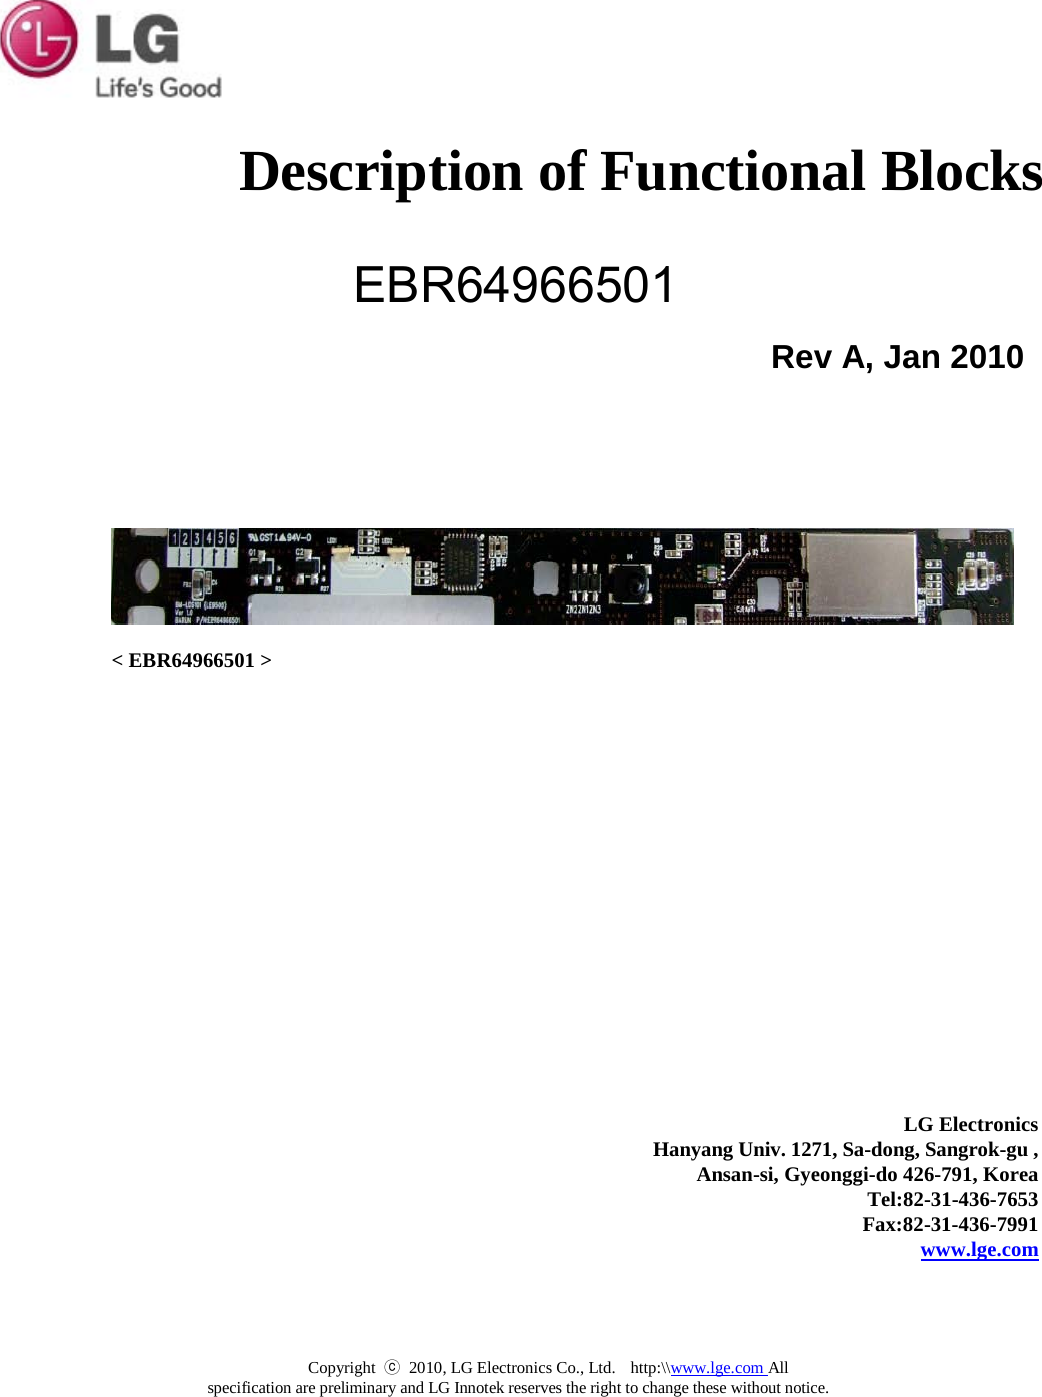  Description of Functional Blocks EBR64966501   Rev A, Jan 2010              &lt; EBR64966501 &gt;              LG Electronics Hanyang Univ. 1271, Sa-dong, Sangrok-gu , Ansan-si, Gyeonggi-do 426-791, Korea Tel:82-31-436-7653 Fax:82-31-436-7991 www.lge.com Copyright  ⓒ 2010, LG Electronics Co., Ltd.  http:\\www.lge.com All specification are preliminary and LG Innotek reserves the right to change these without notice. 